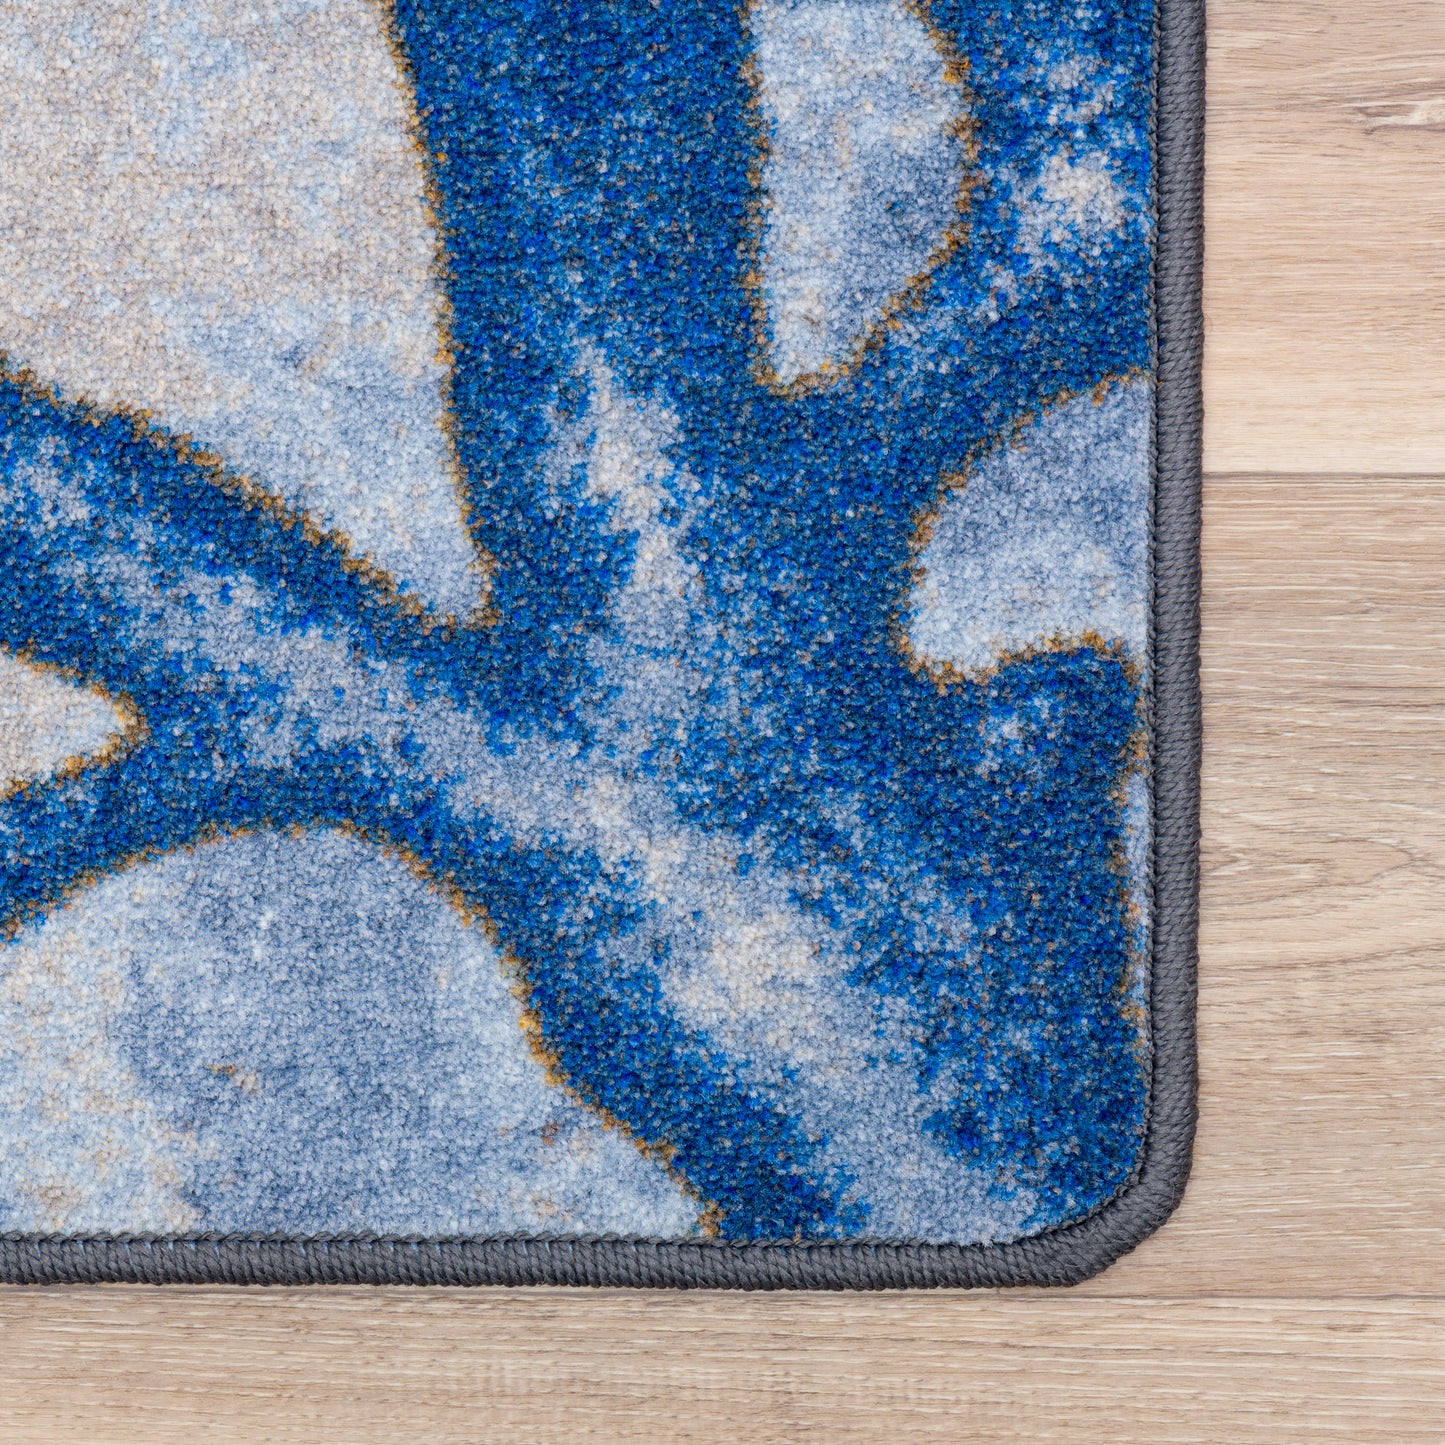 Tropical paradise-inspired coral rug for beach house or contemporary spaces